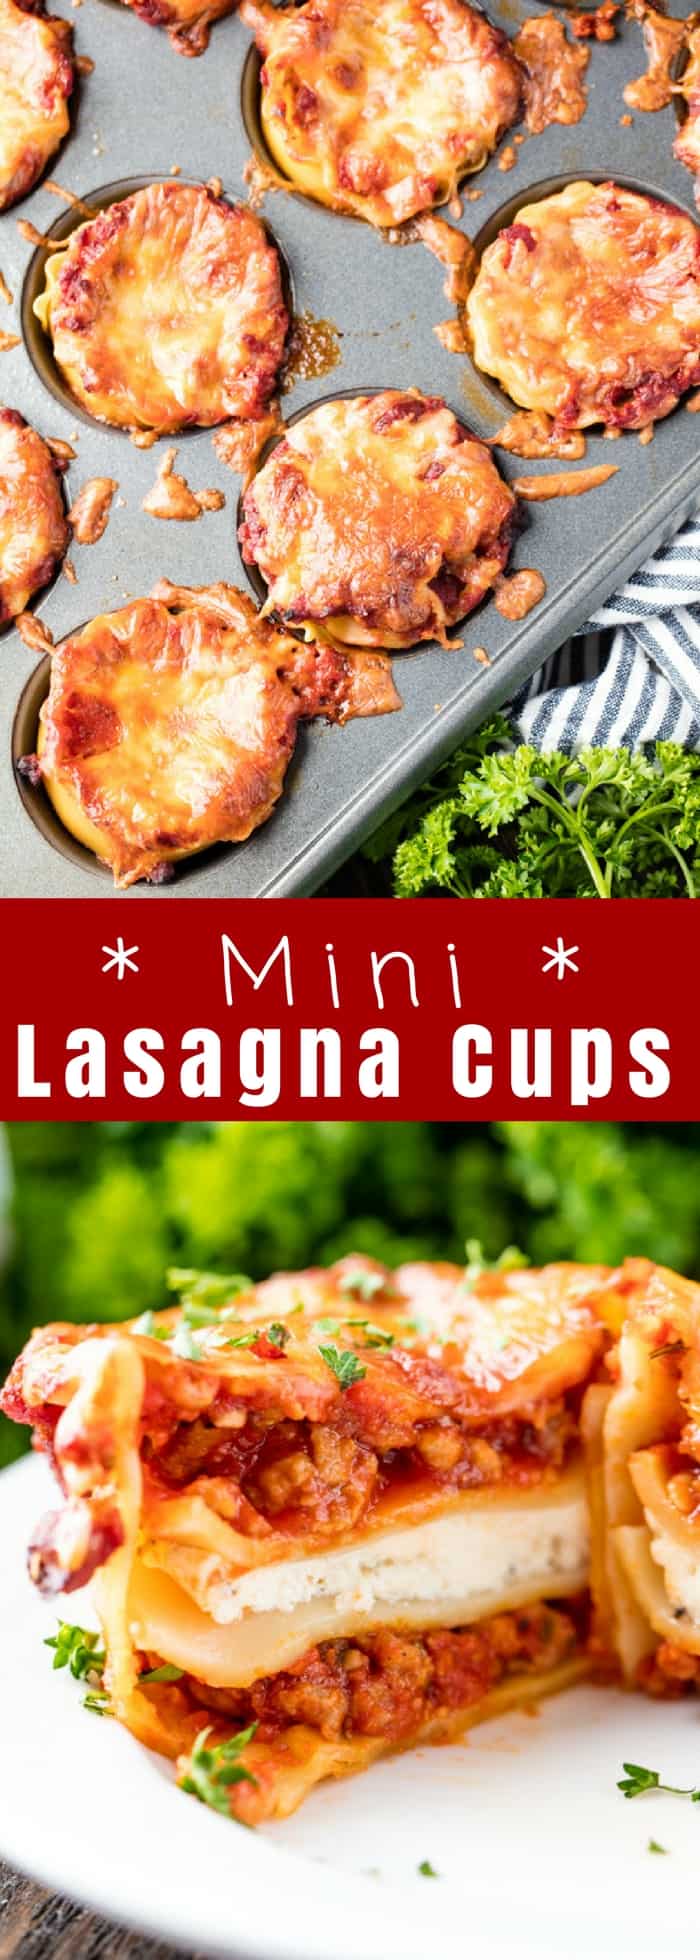 Mini Lasagna Cups are the perfect appetizer addition to your parties, or even just a new easy way to put together lasagna for dinner! So delicious, and so much fun!